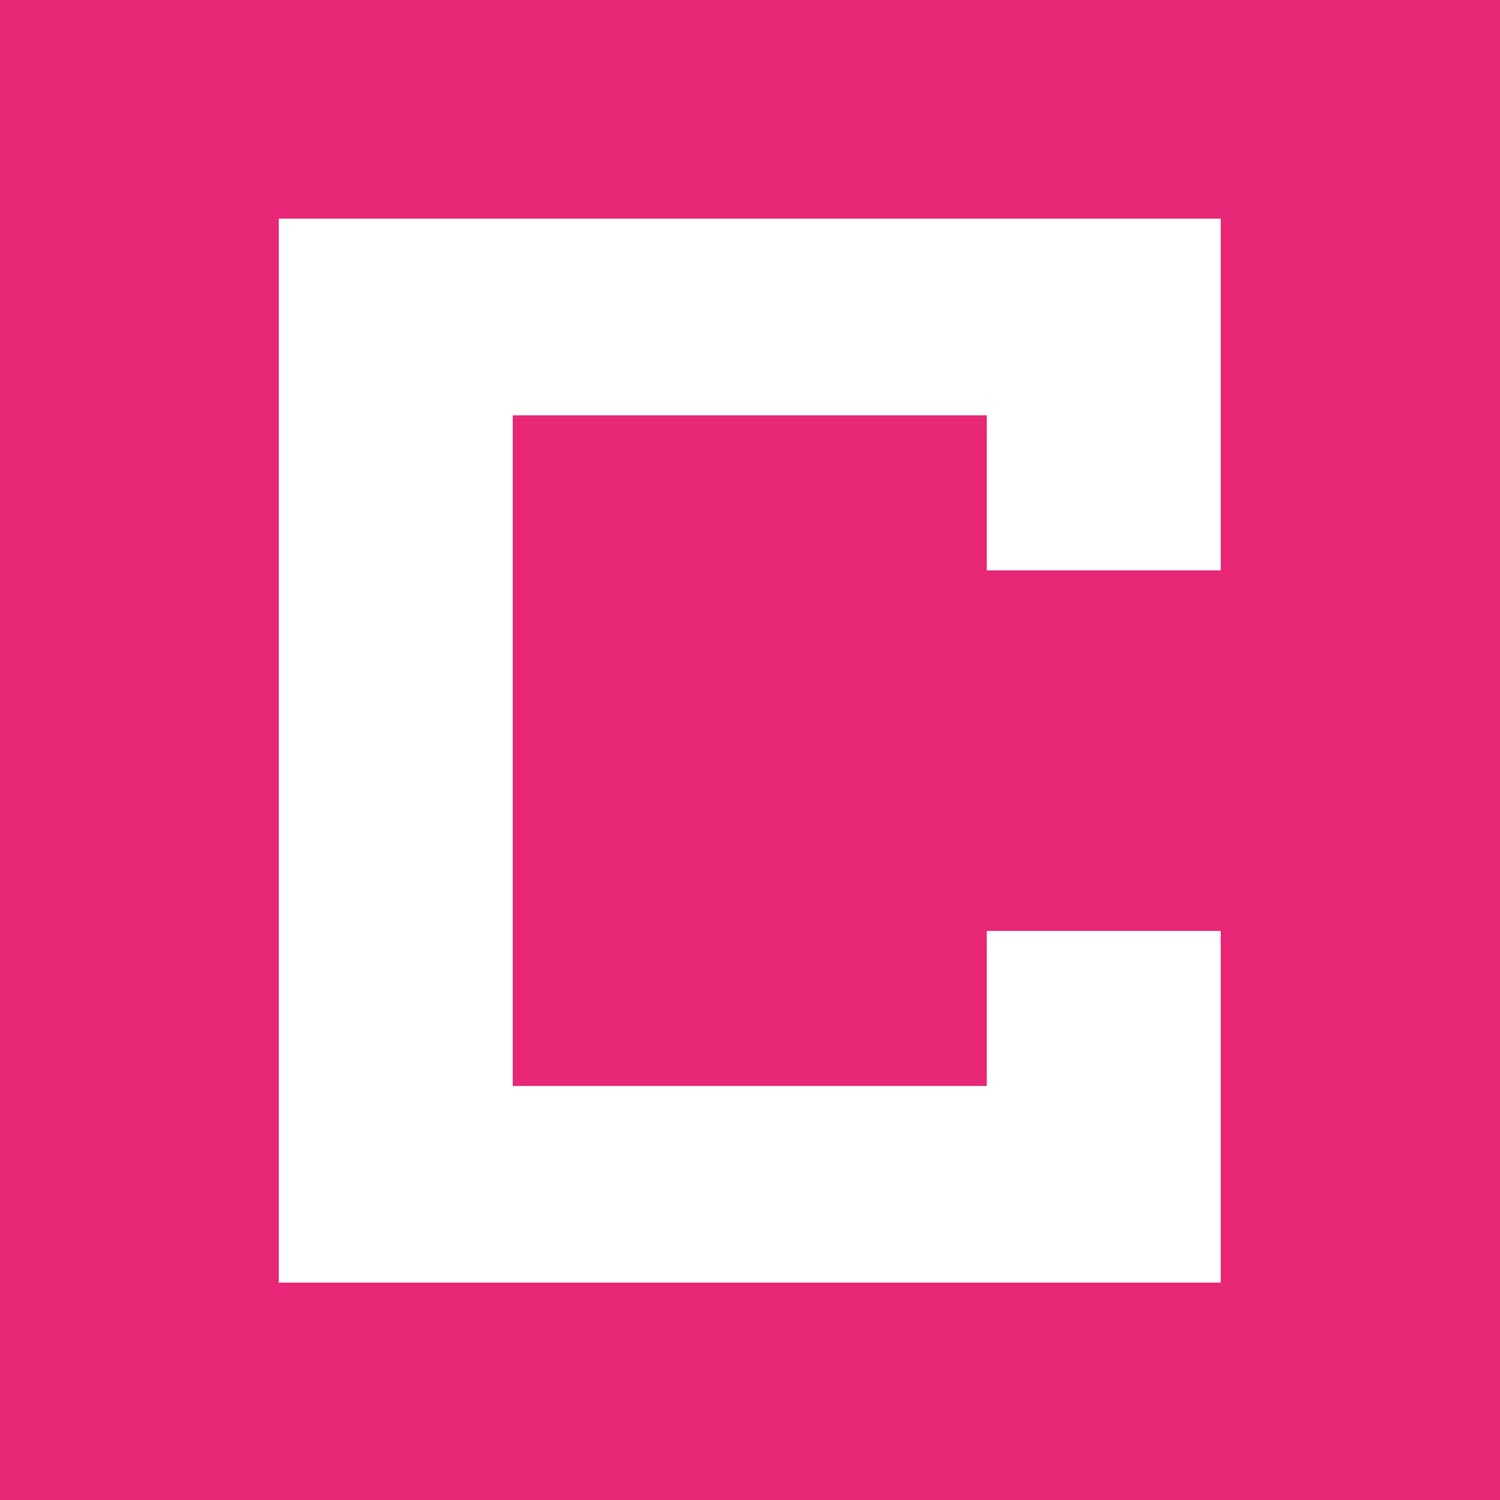 Minimal logo redesign for the Currency, hot pink background with white letter C